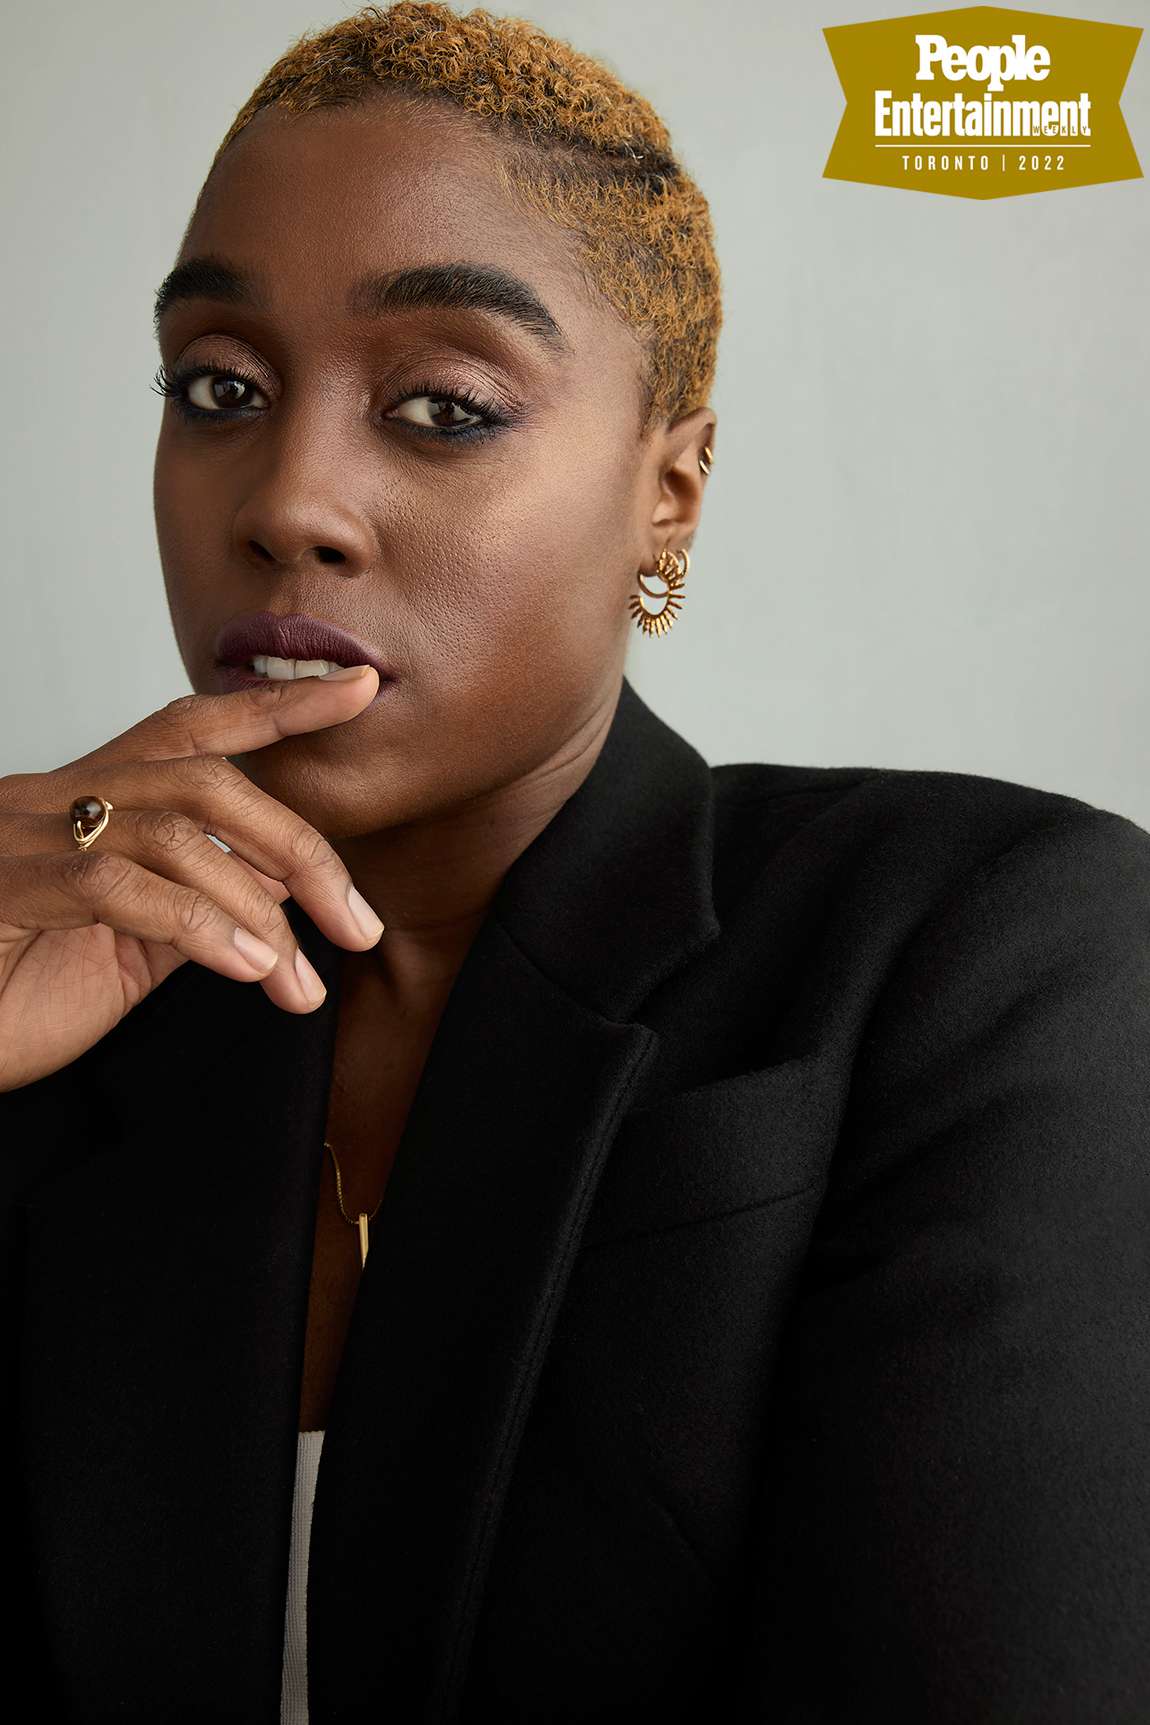 Lashana Lynch of 'The Woman King' on how physical training gives her mental strength